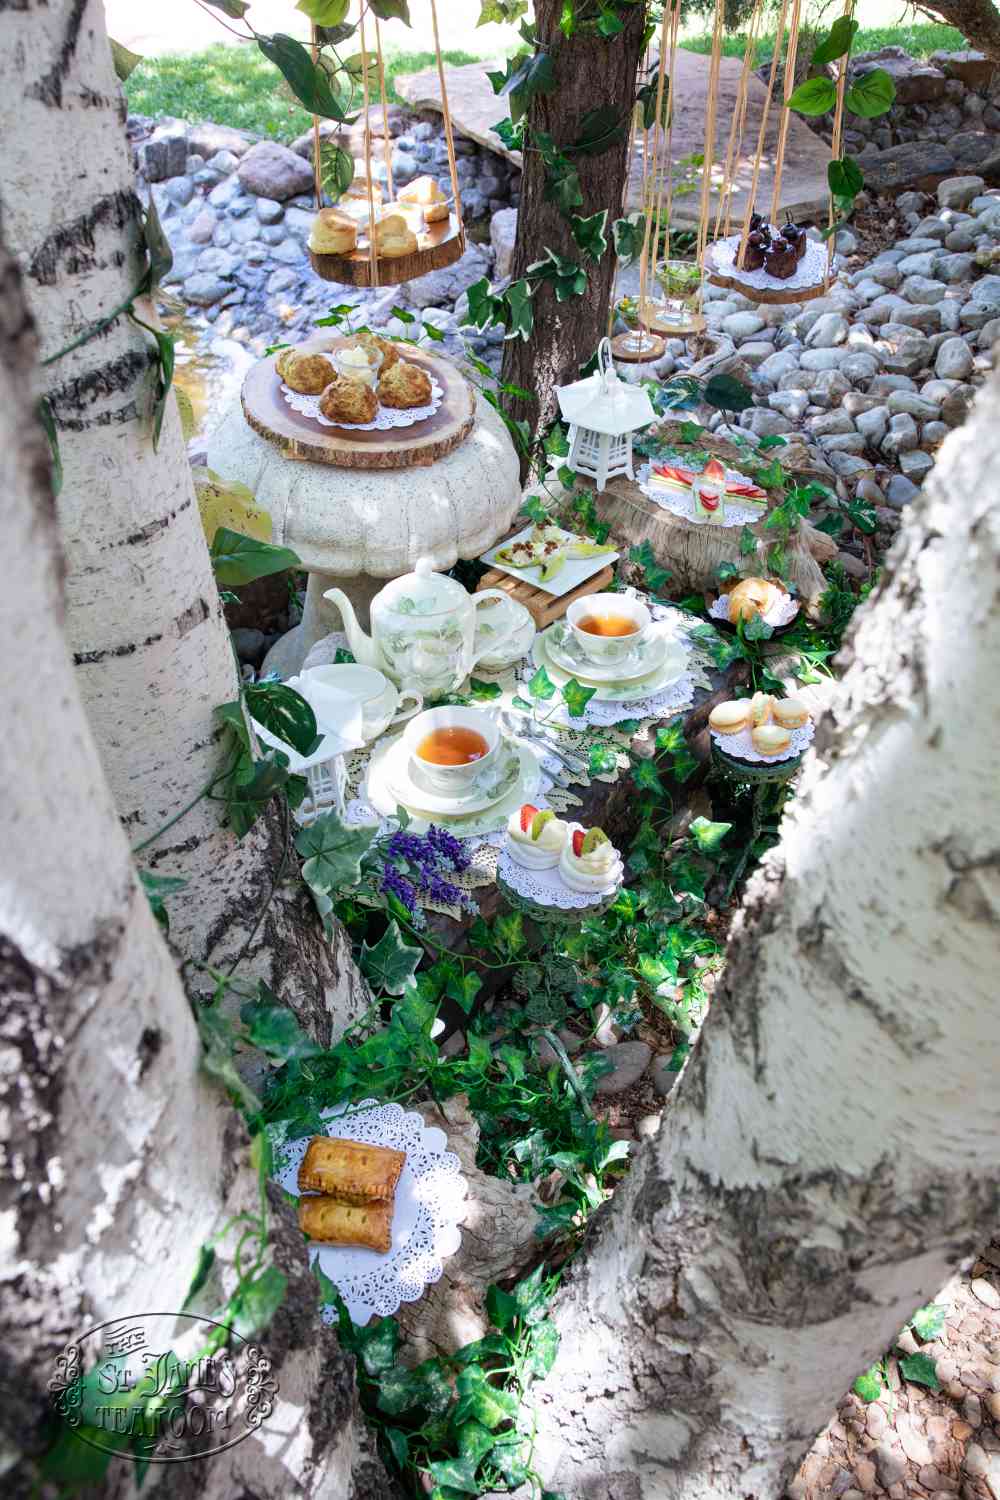 Afternoon Tea Menu - A Neverland Adventure - Picnic in the Forest